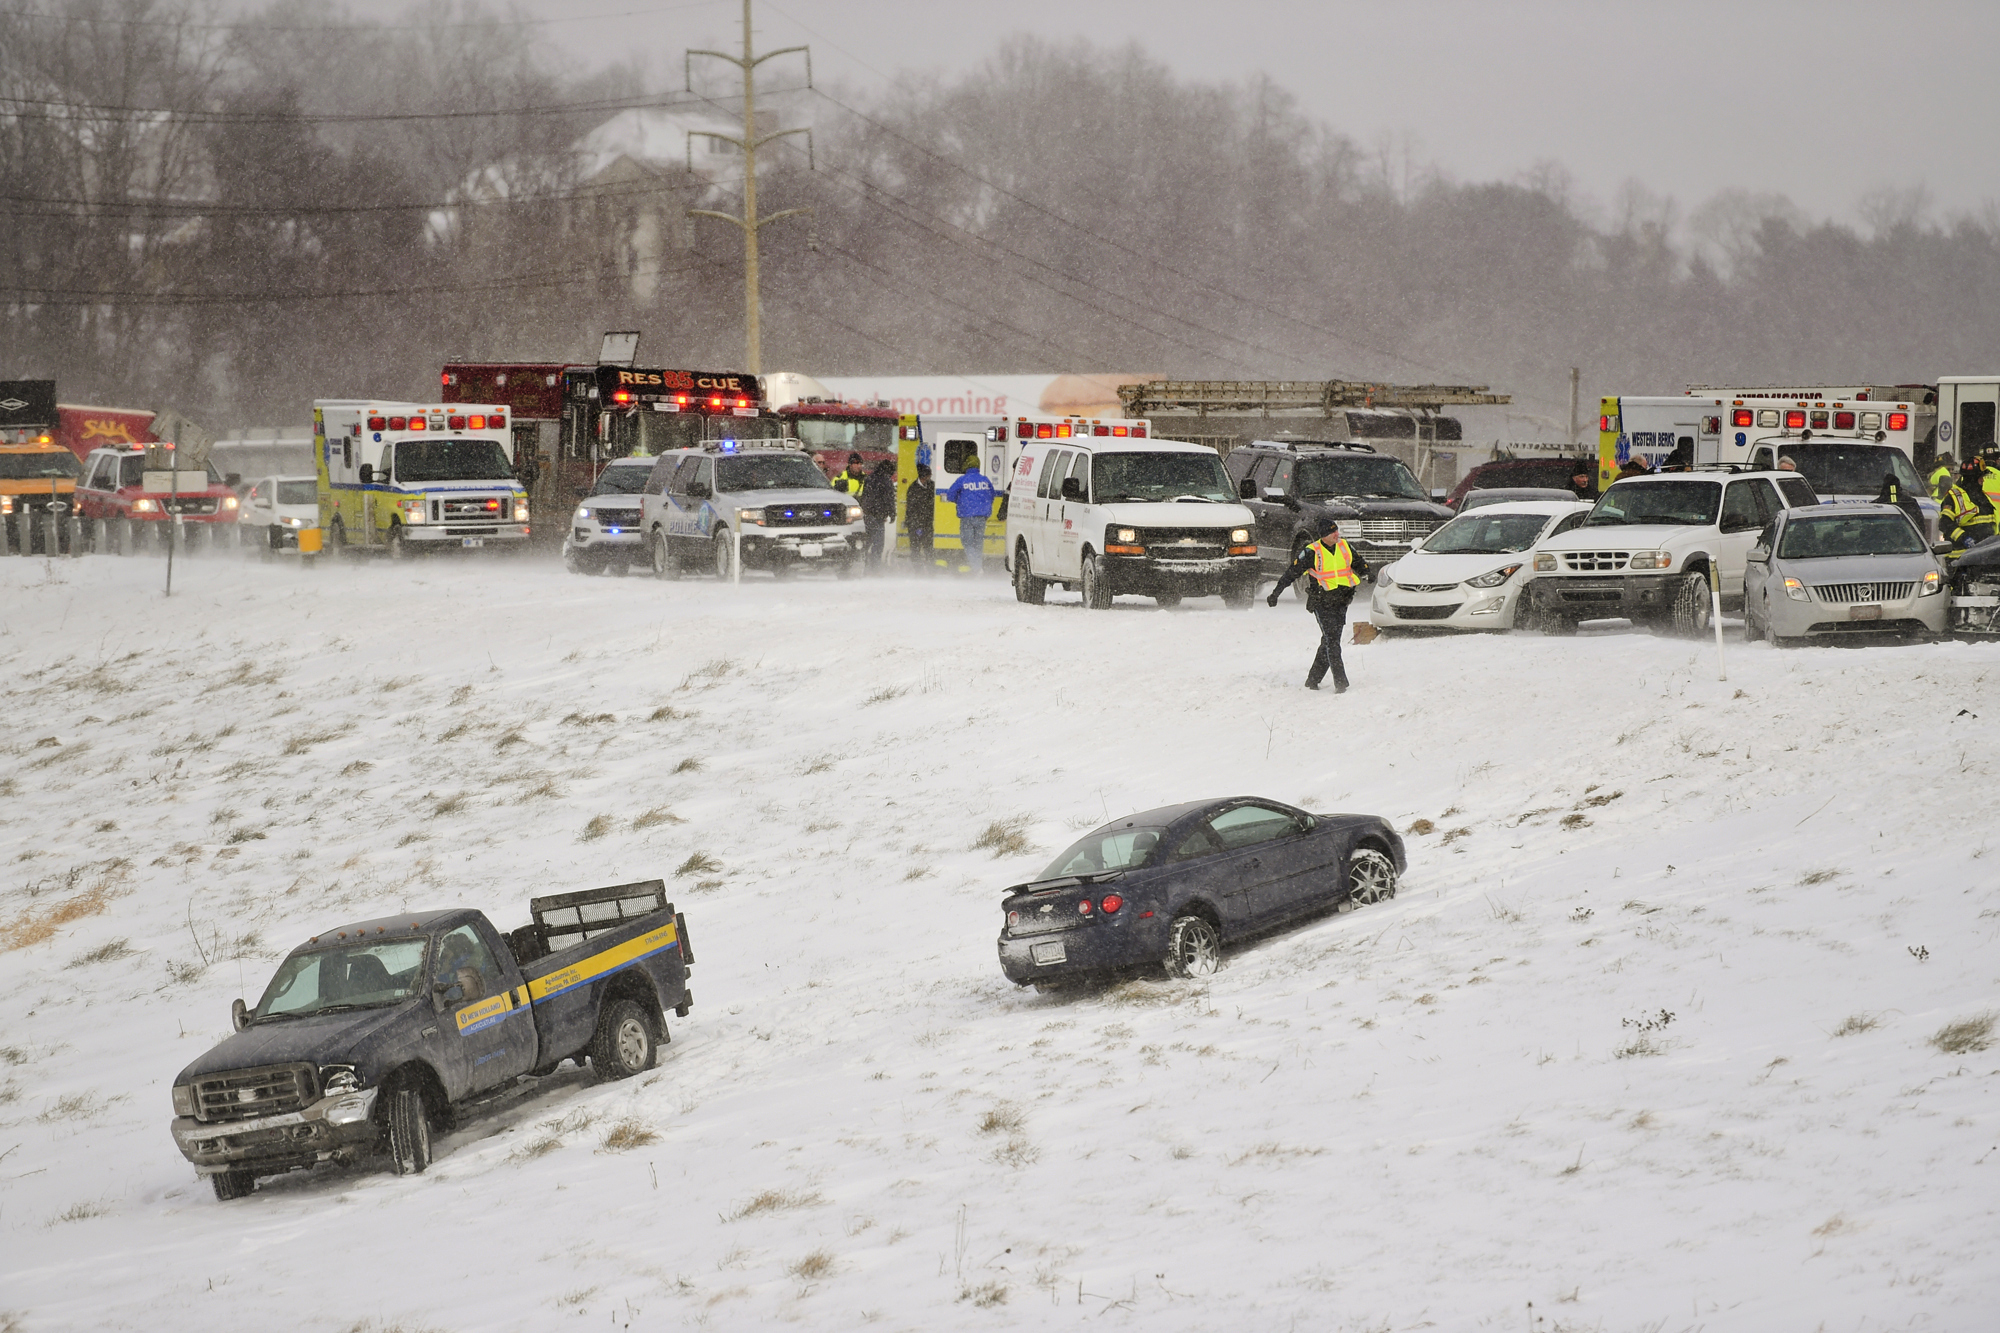 Human toll of cold: more than 2 dozen dead, hundreds hurt